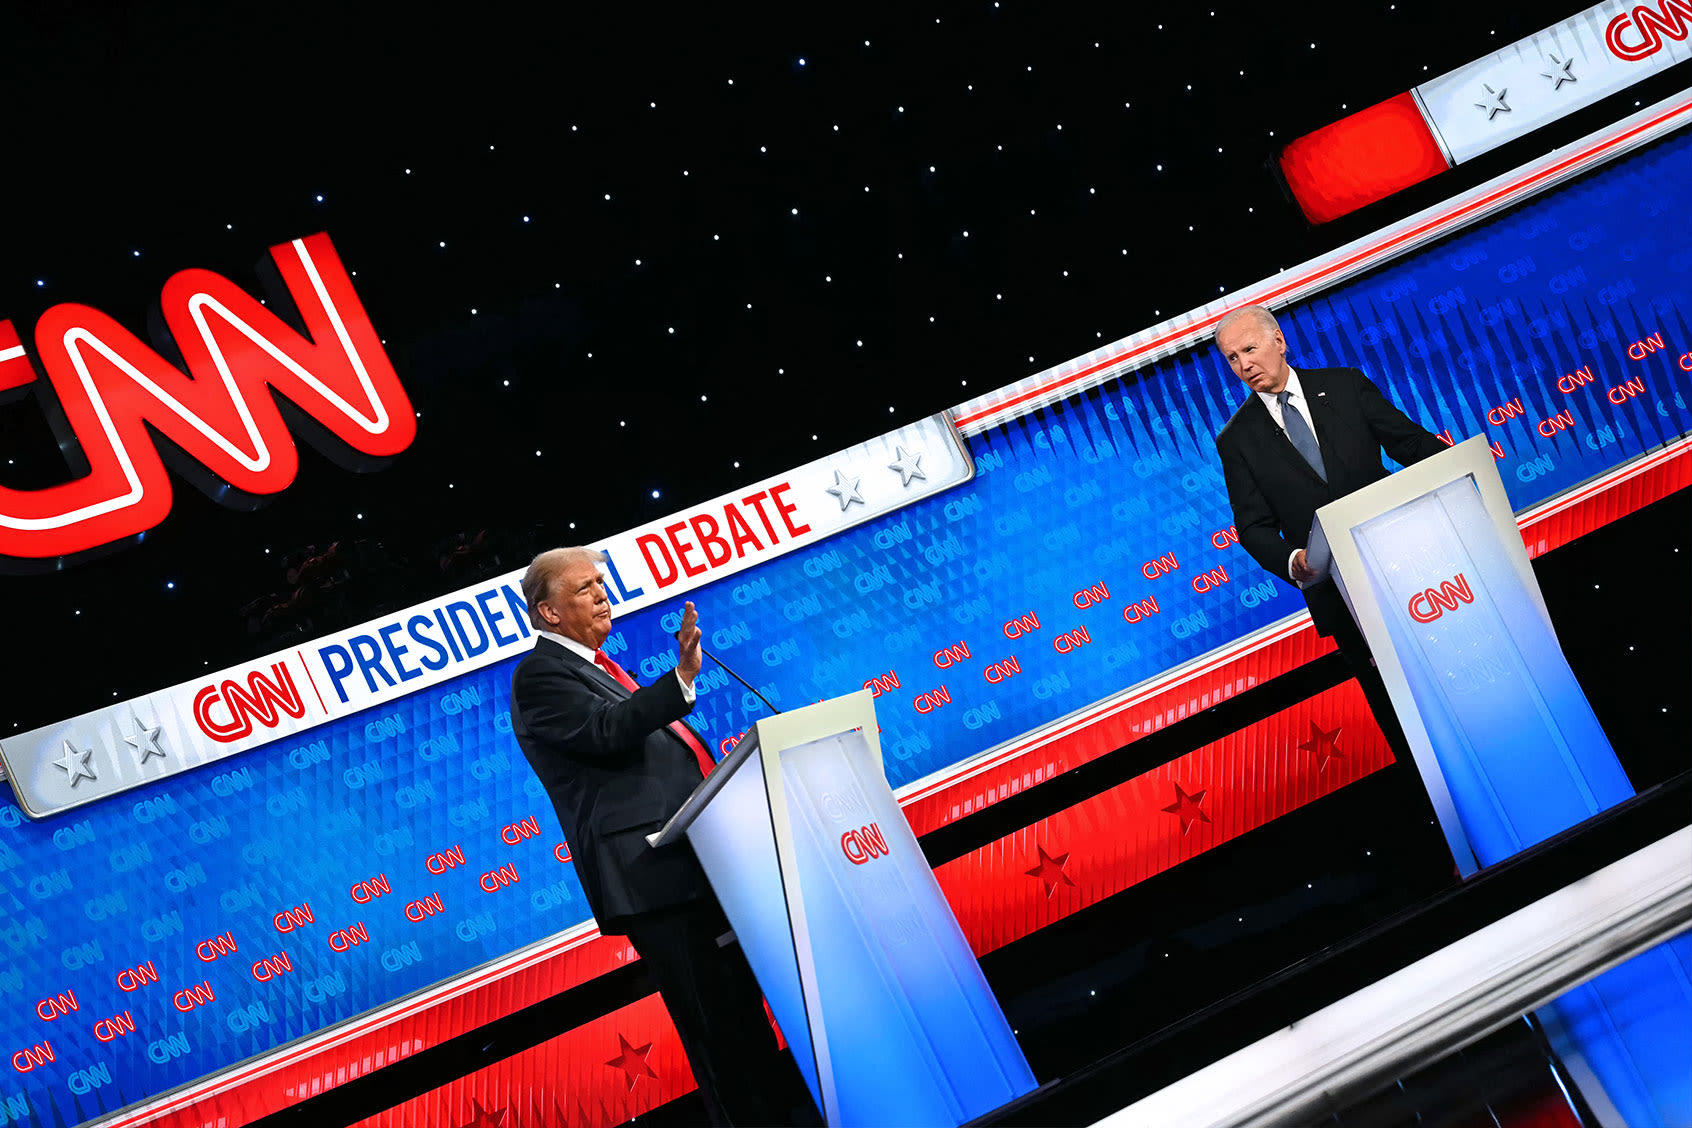 Exclusive poll: Media coverage hurt Biden, who leads only among voters who didn't see the debate